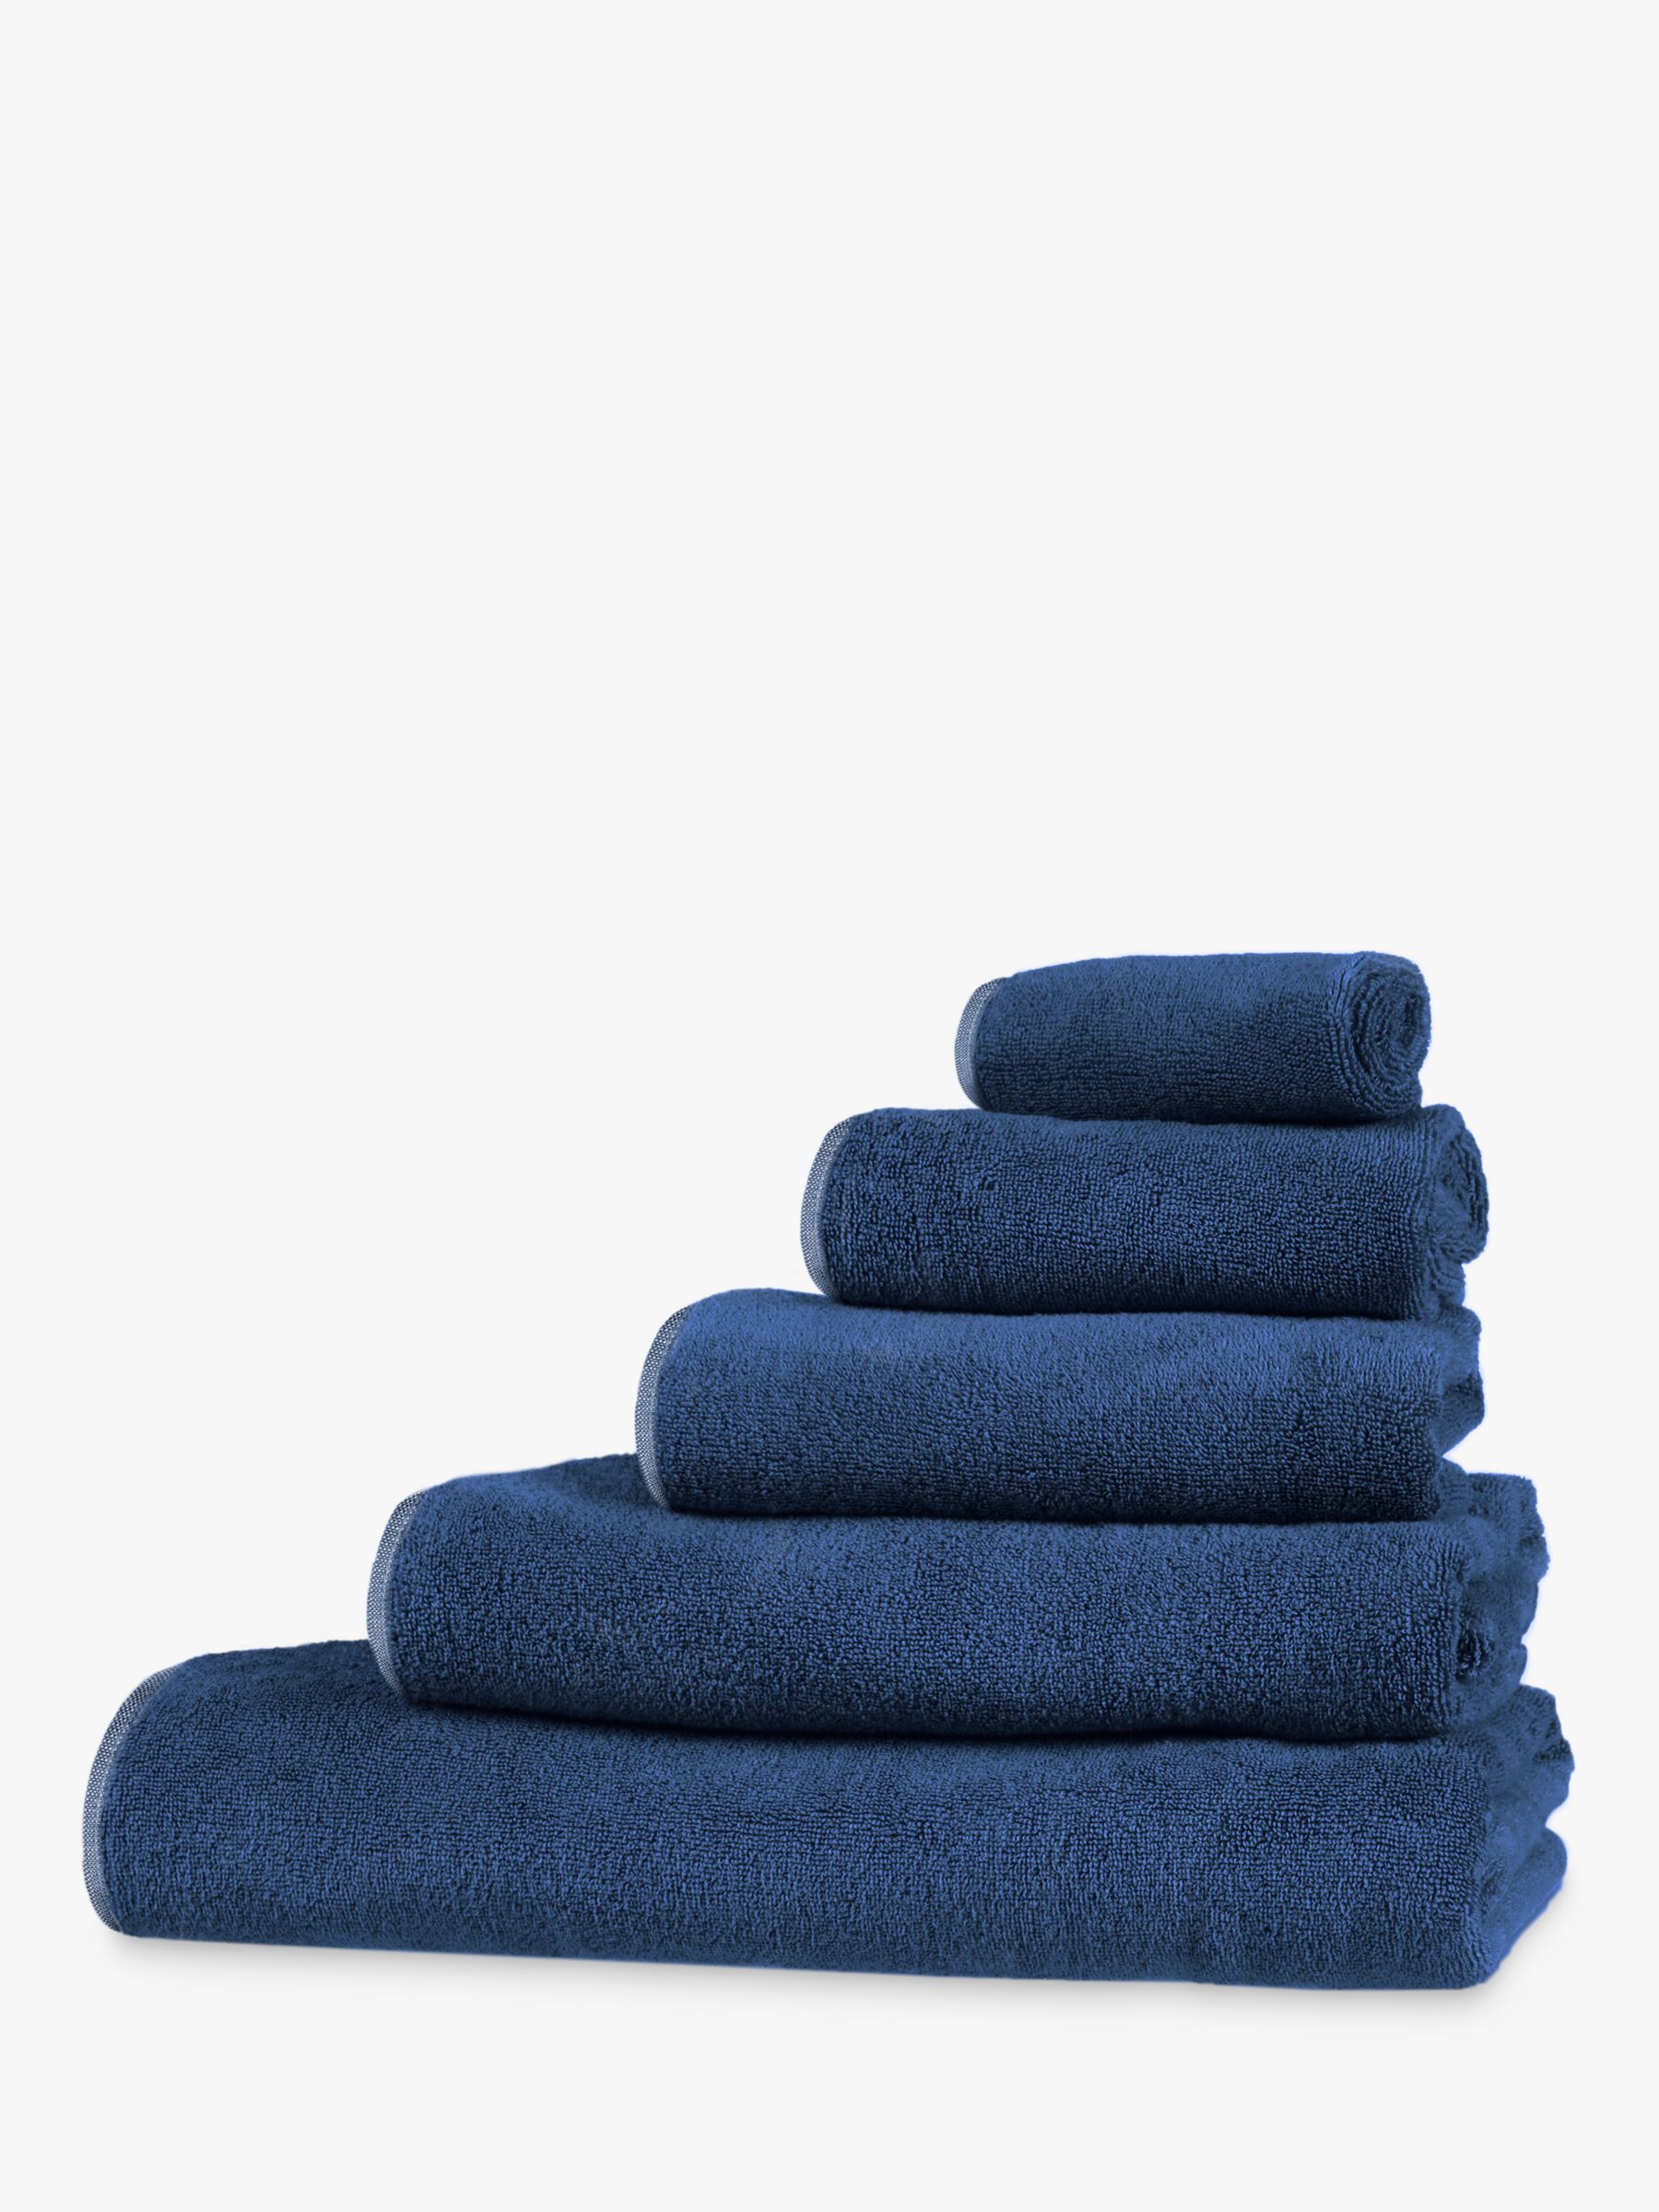 House by John Lewis Quick Dry Face Cloth (Set of 2), Navy